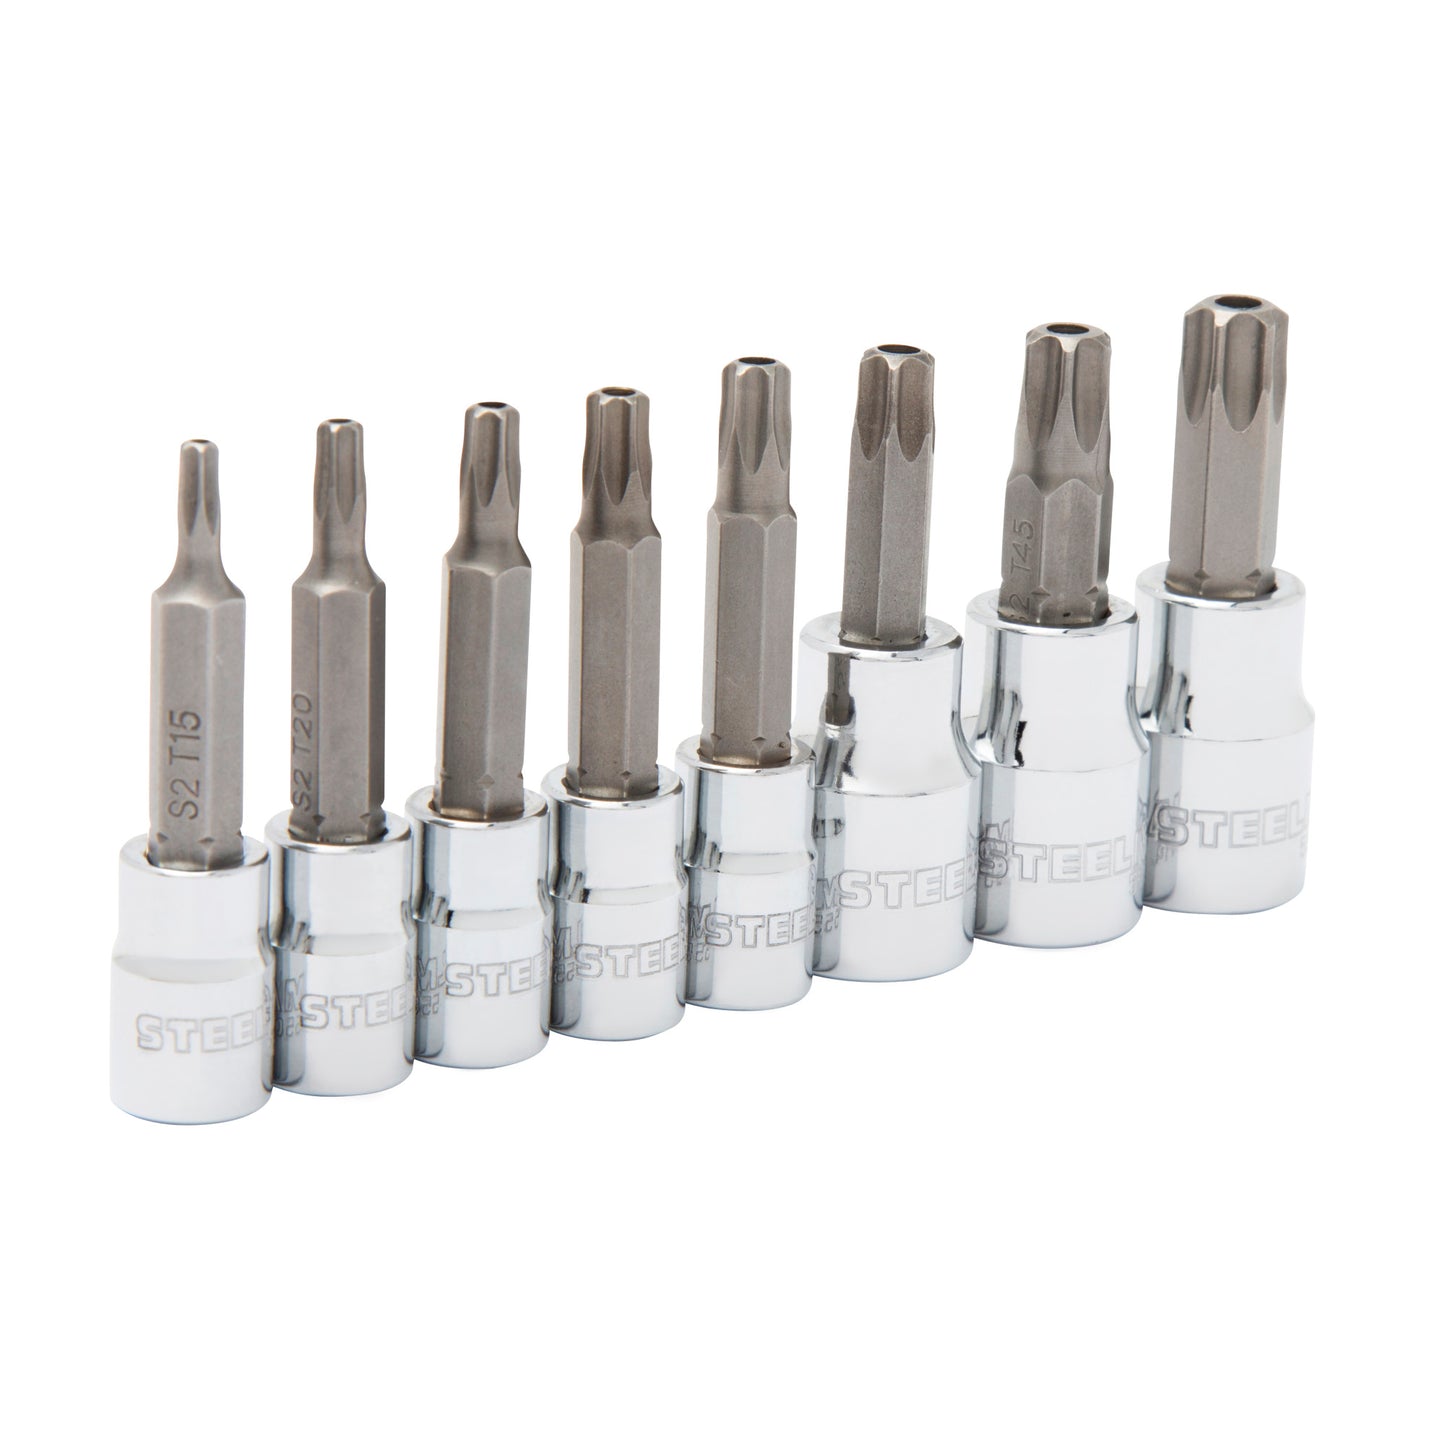 8-Piece 1/4-inch and 3/8-inch Drive Tamper-Resistant Star Bit Socket Set